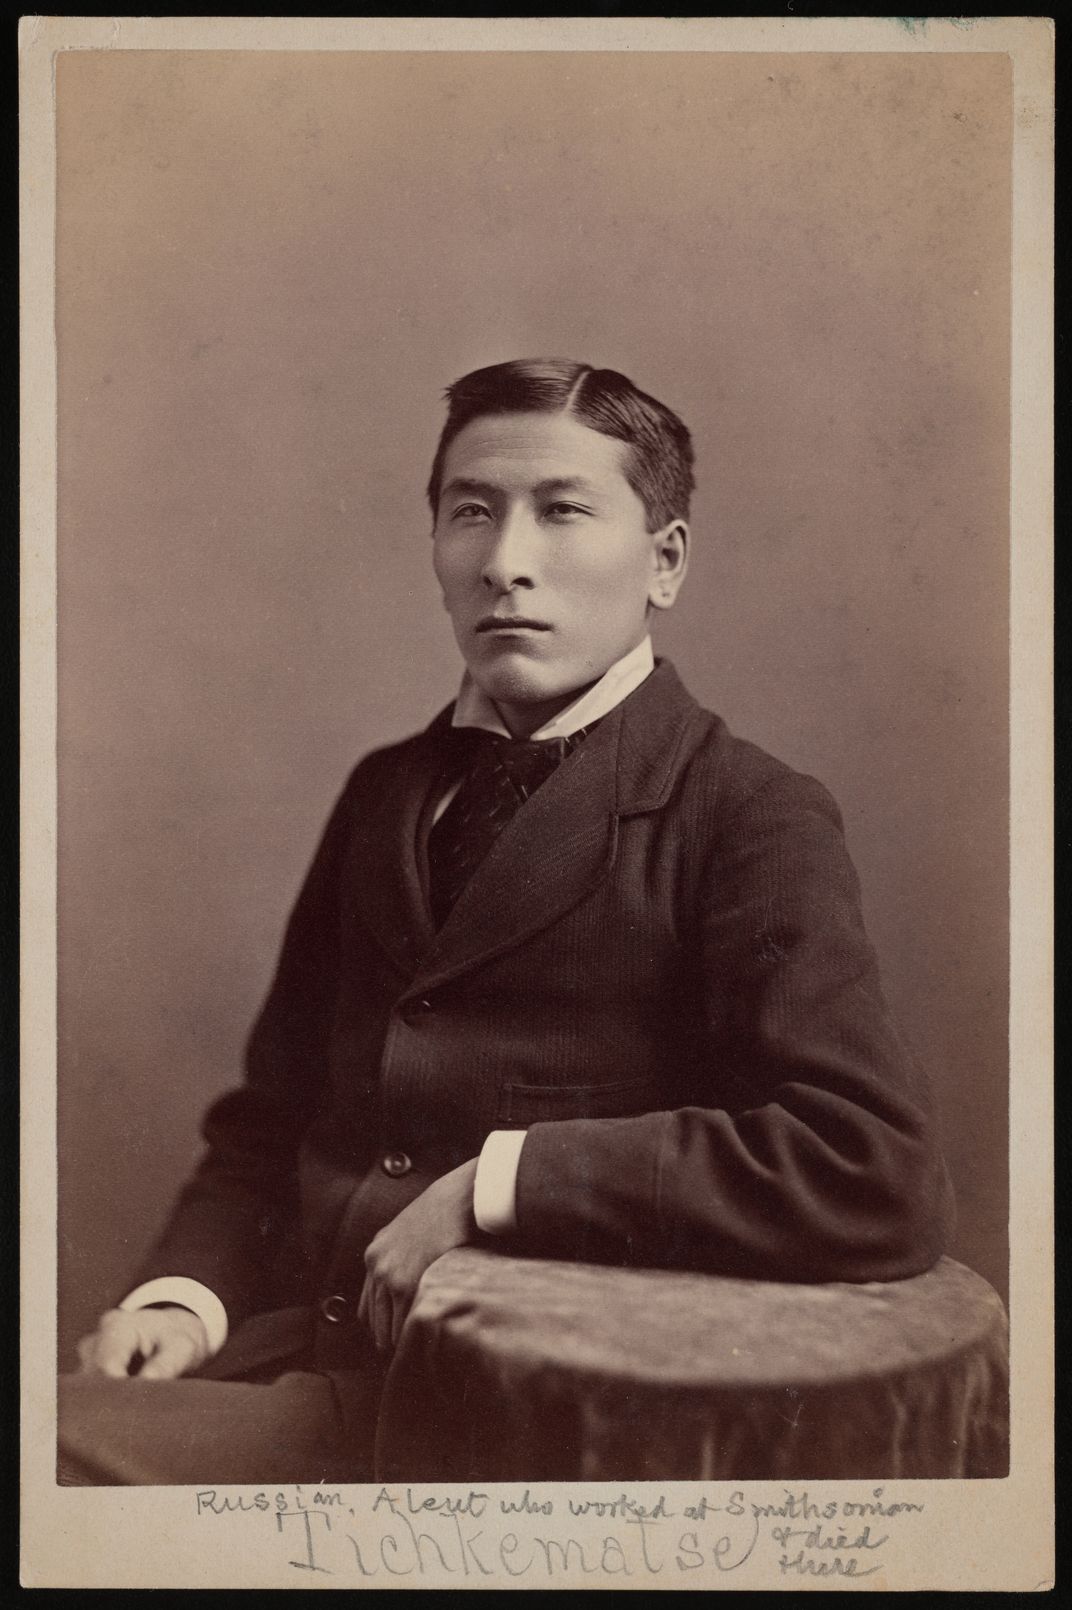 Late 19th century photographic portrait of man in suit.